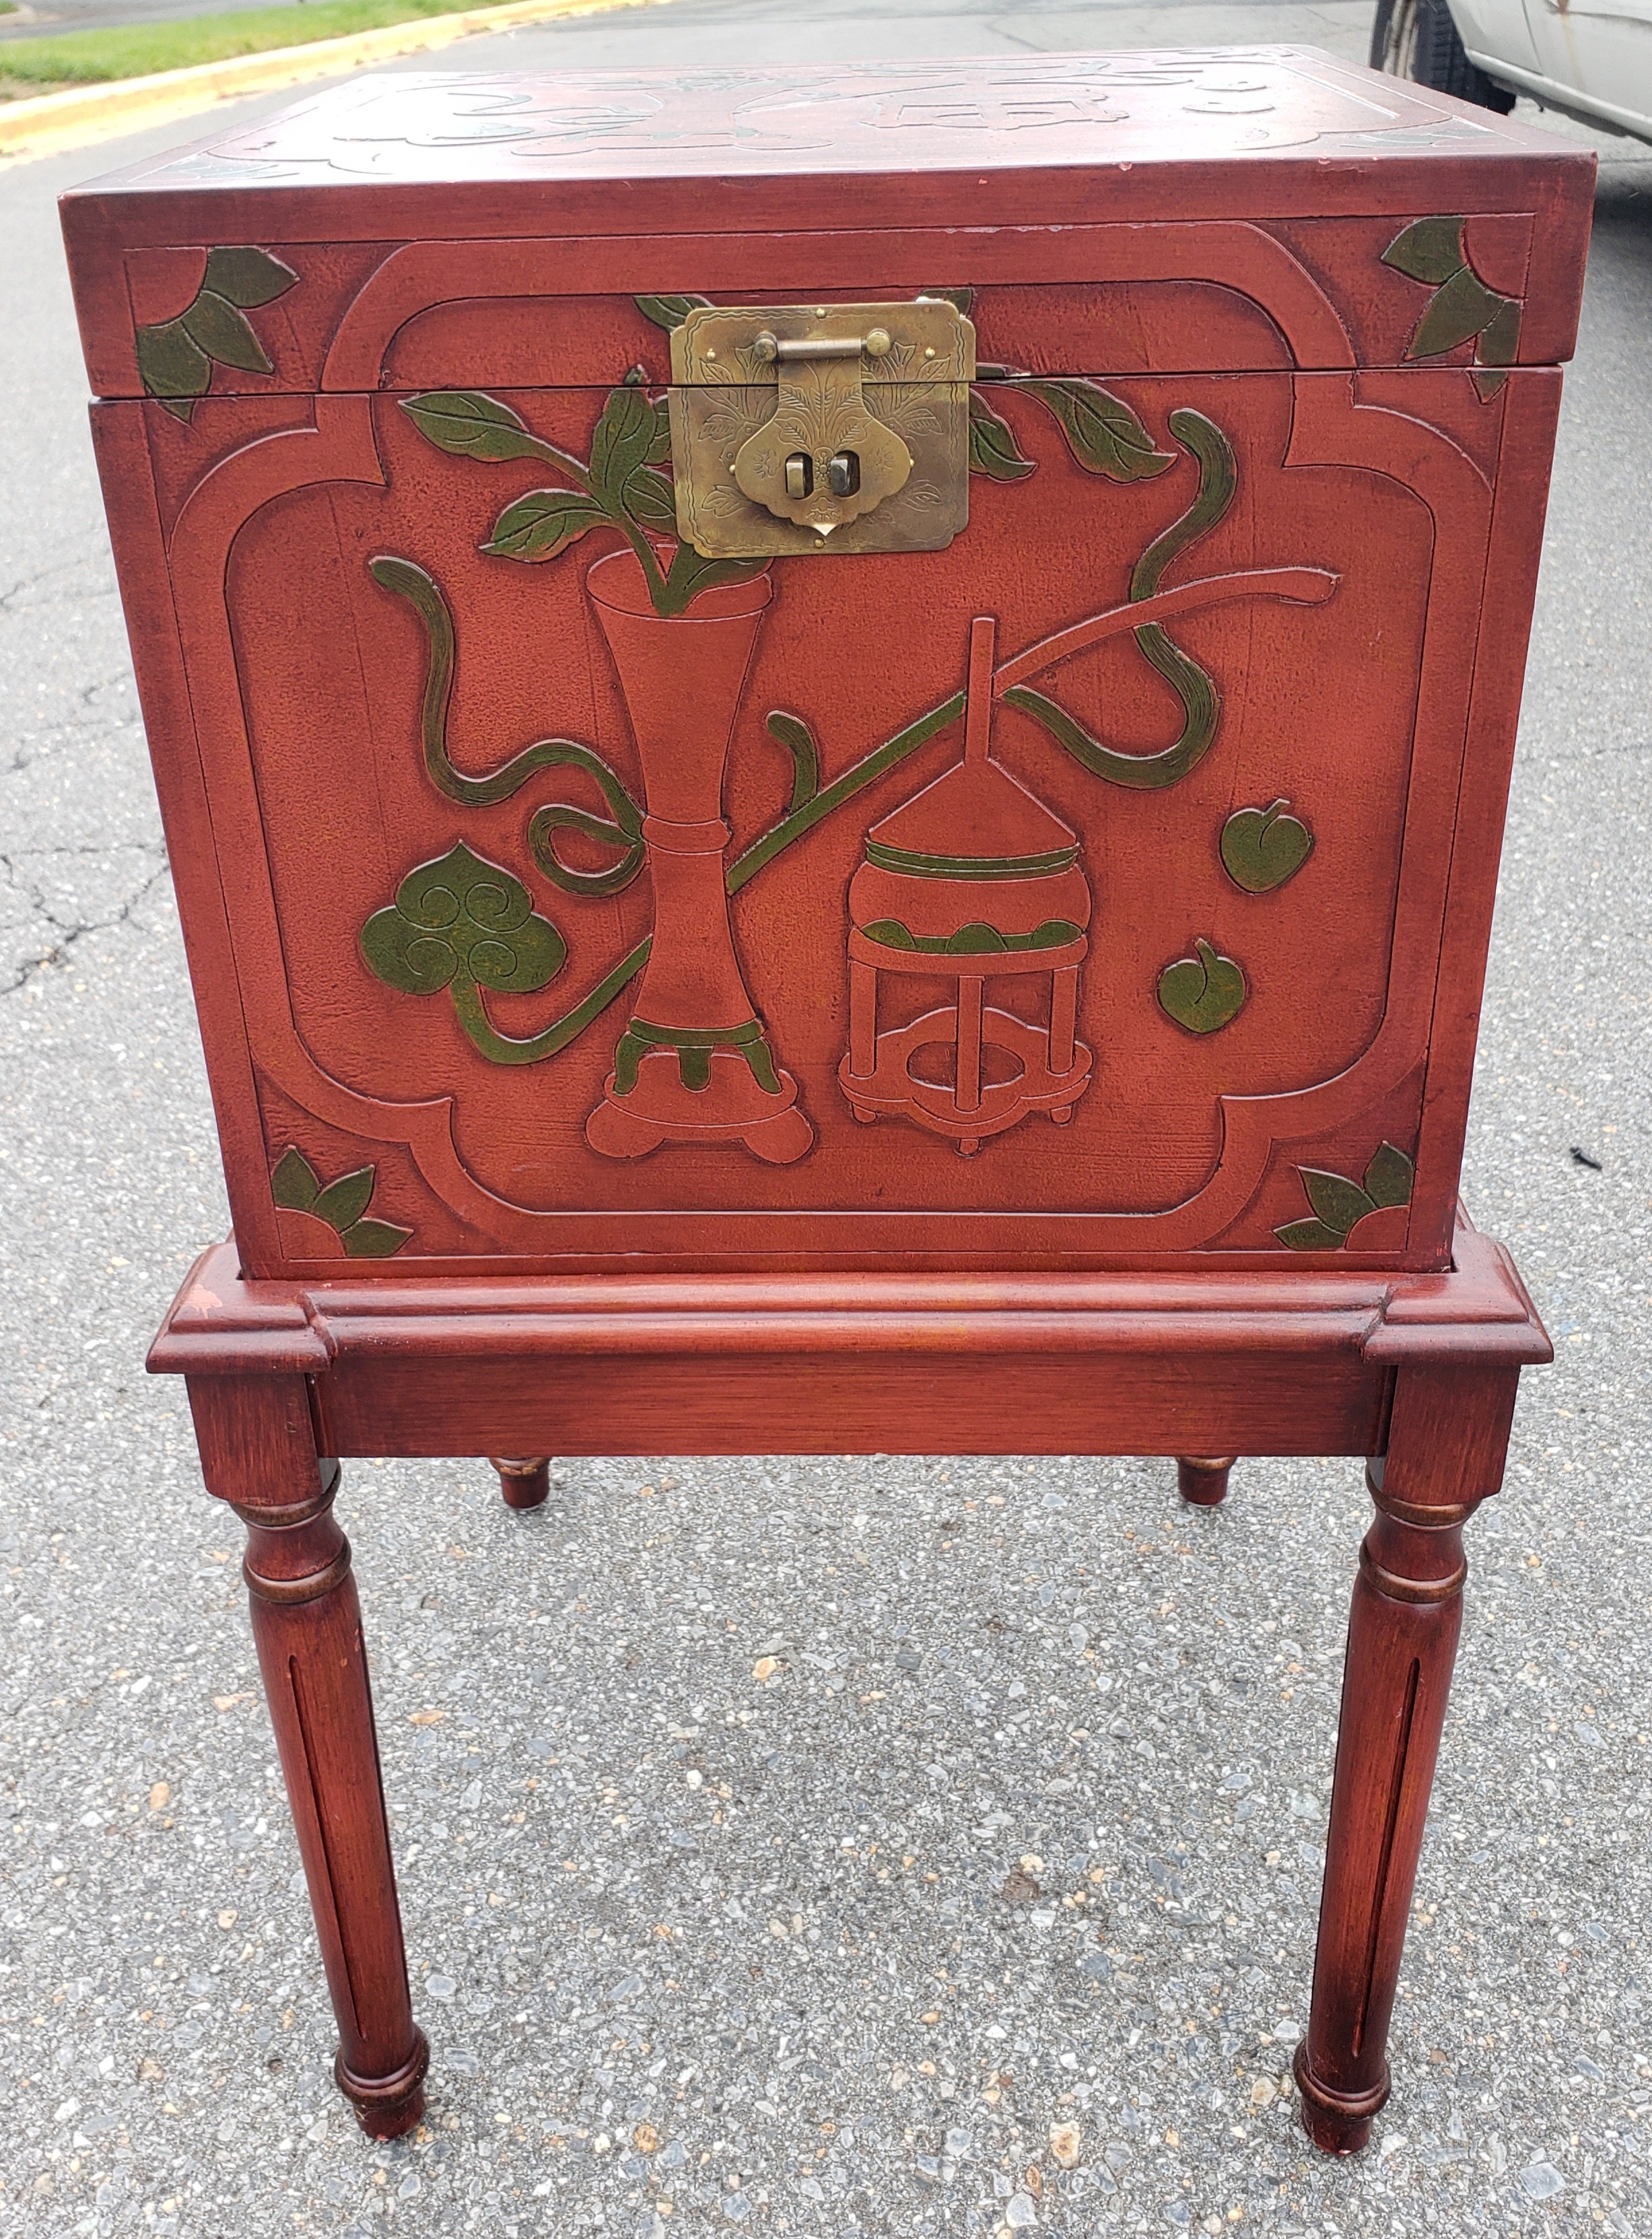 A Contemporary Red Lacquered and Ornate Asian Storage cabinet or Filing Cabinet on Stand. Inside Felt lined and stand top. Very good vintage condition. comes with removable filing rack and file hangind rails. Measures 17